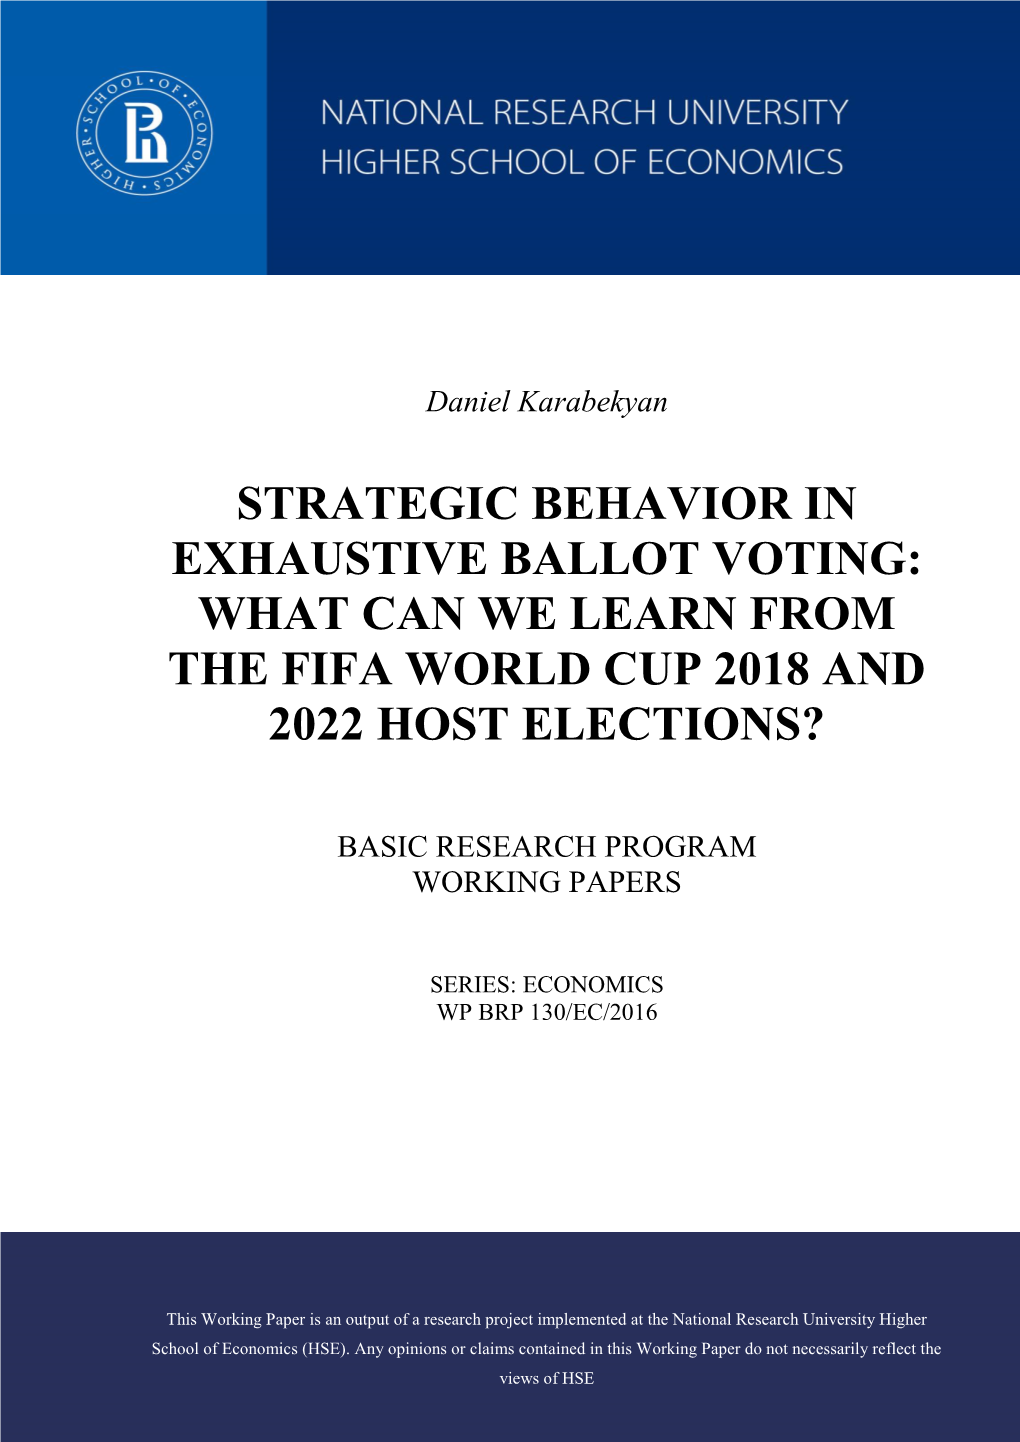 Strategic Behavior in Exhaustive Ballot Voting: What Can We Learn from the Fifa World Cup 2018 and 2022 Host Elections?